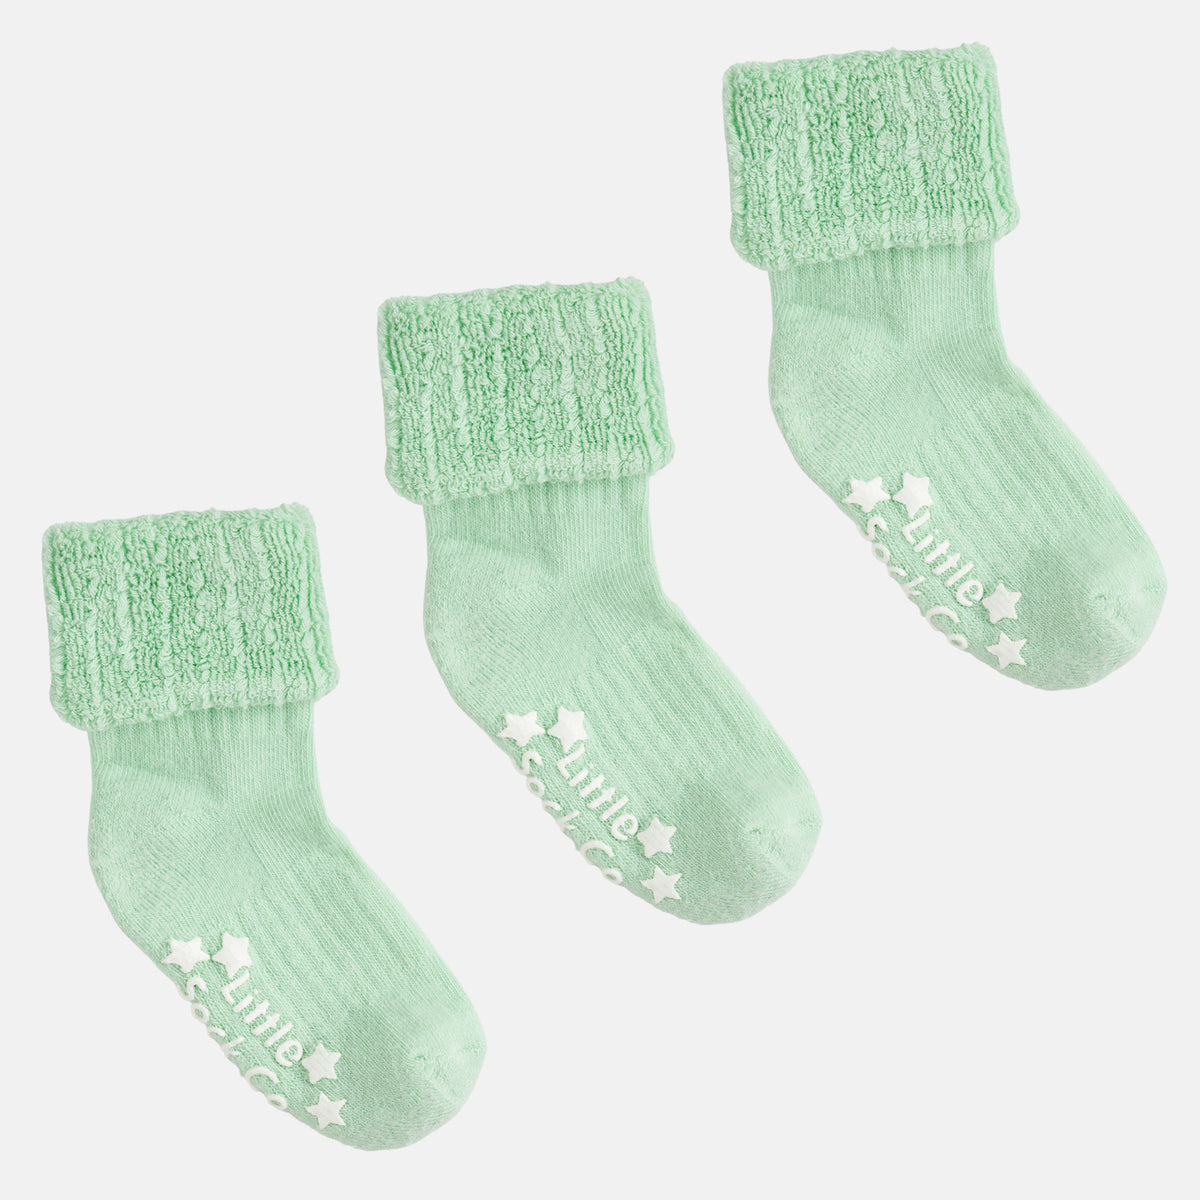 Cosy Stay on Winter Warm Non Slip Baby Socks - 3 Pack in Matcha - 0-2 Years